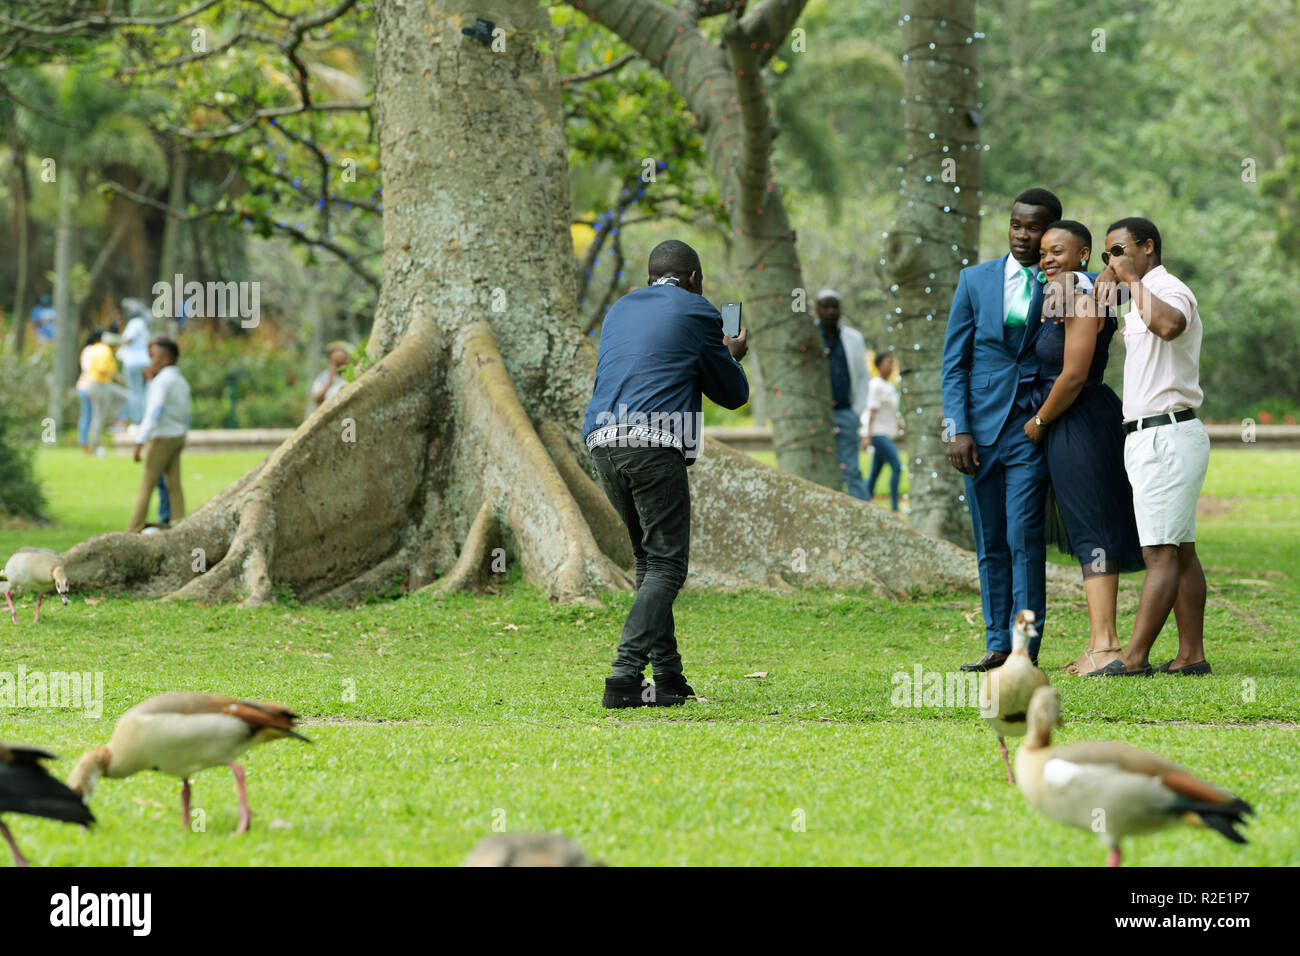 Durban, KwaZulu-Natal, South Africa, young adult man taking cell phone photo of group, friends, smart dress, city Botanical Garden Stock Photo